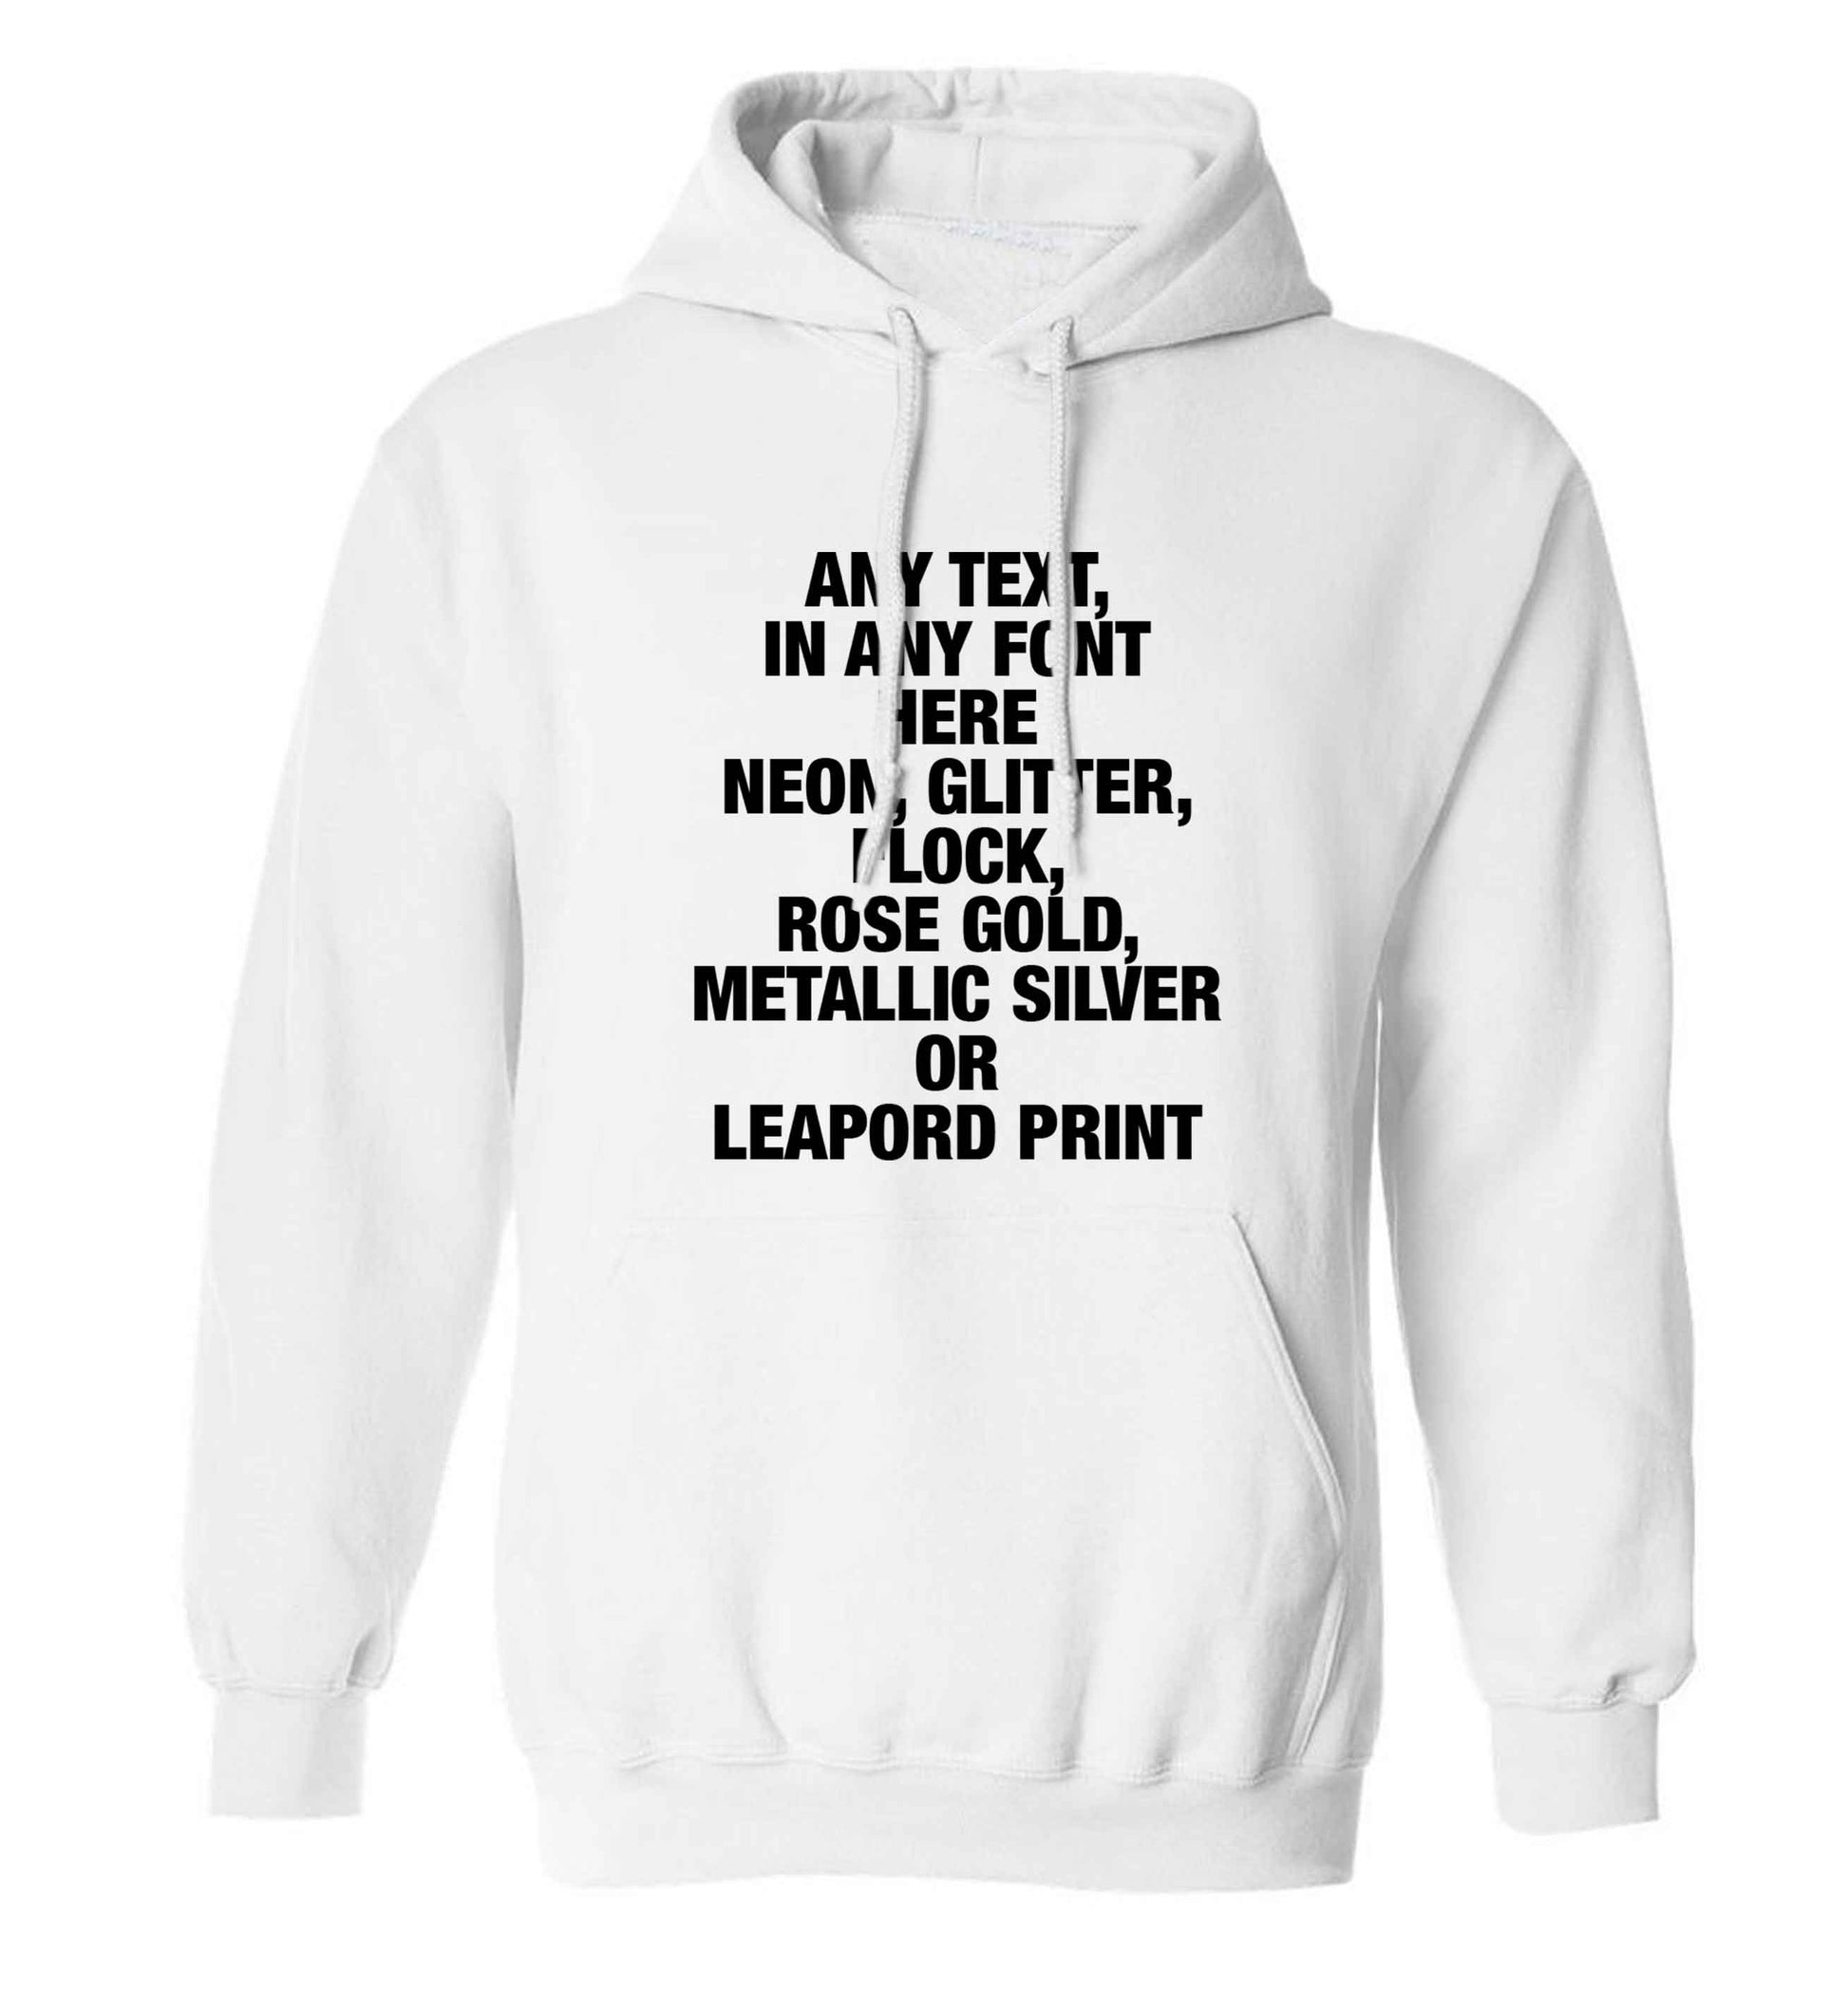 Premium custom order any text colour and font adults unisex white hoodie 2XL